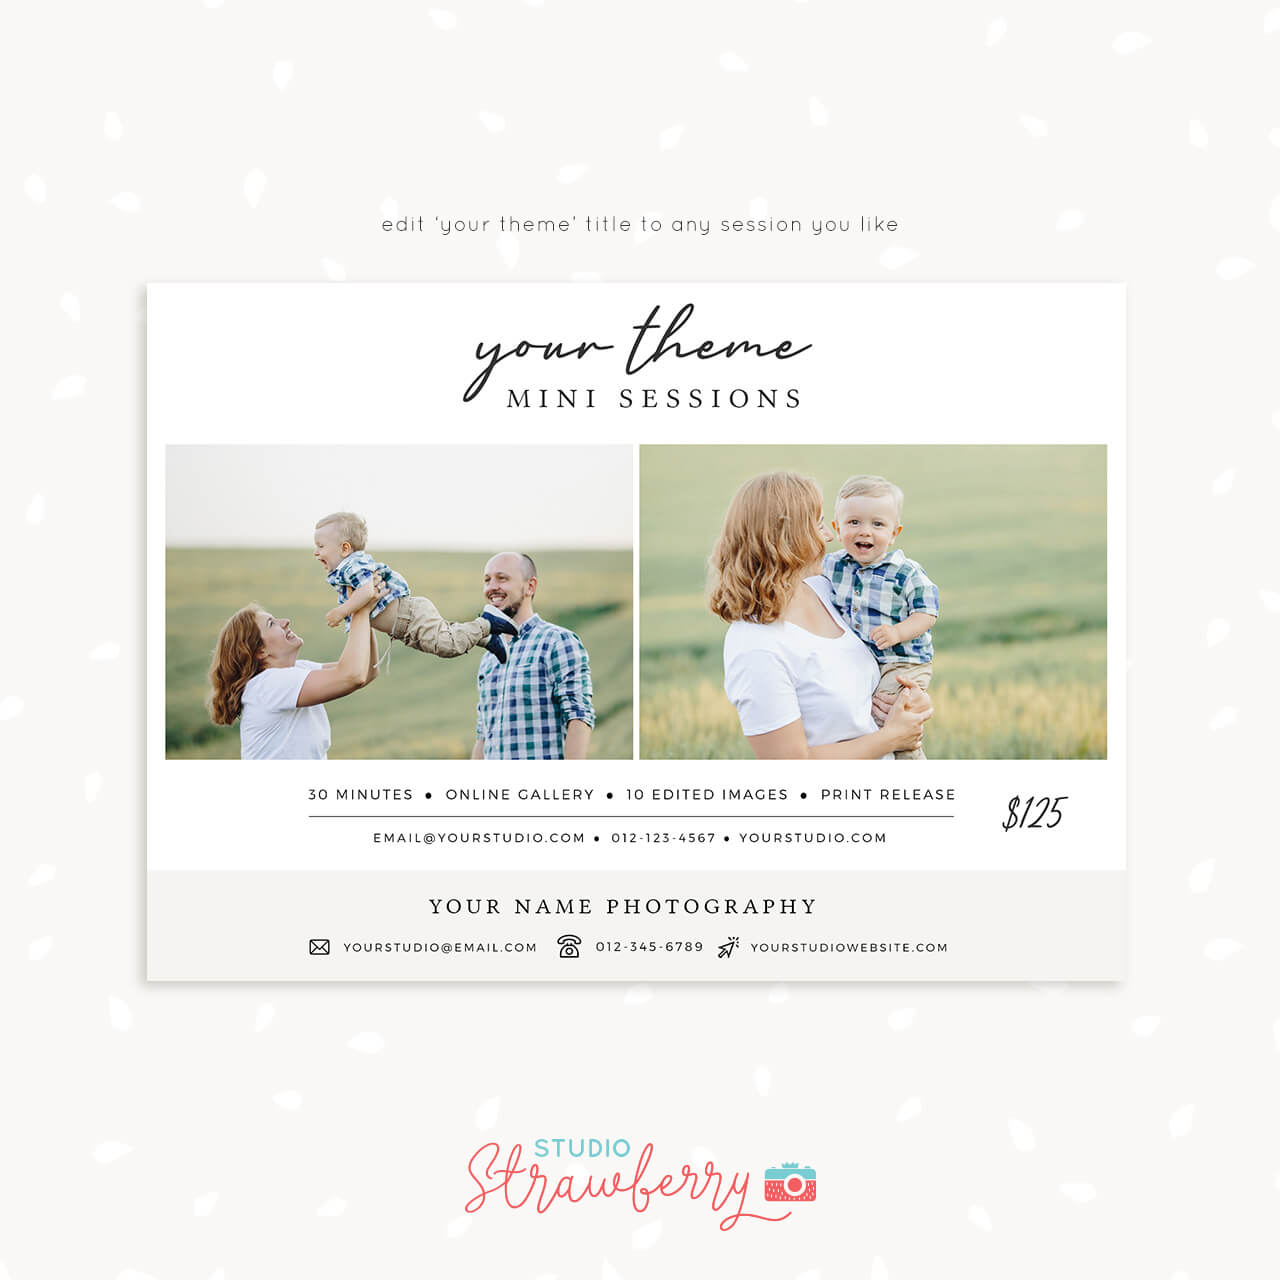 Your theme mini sessions template